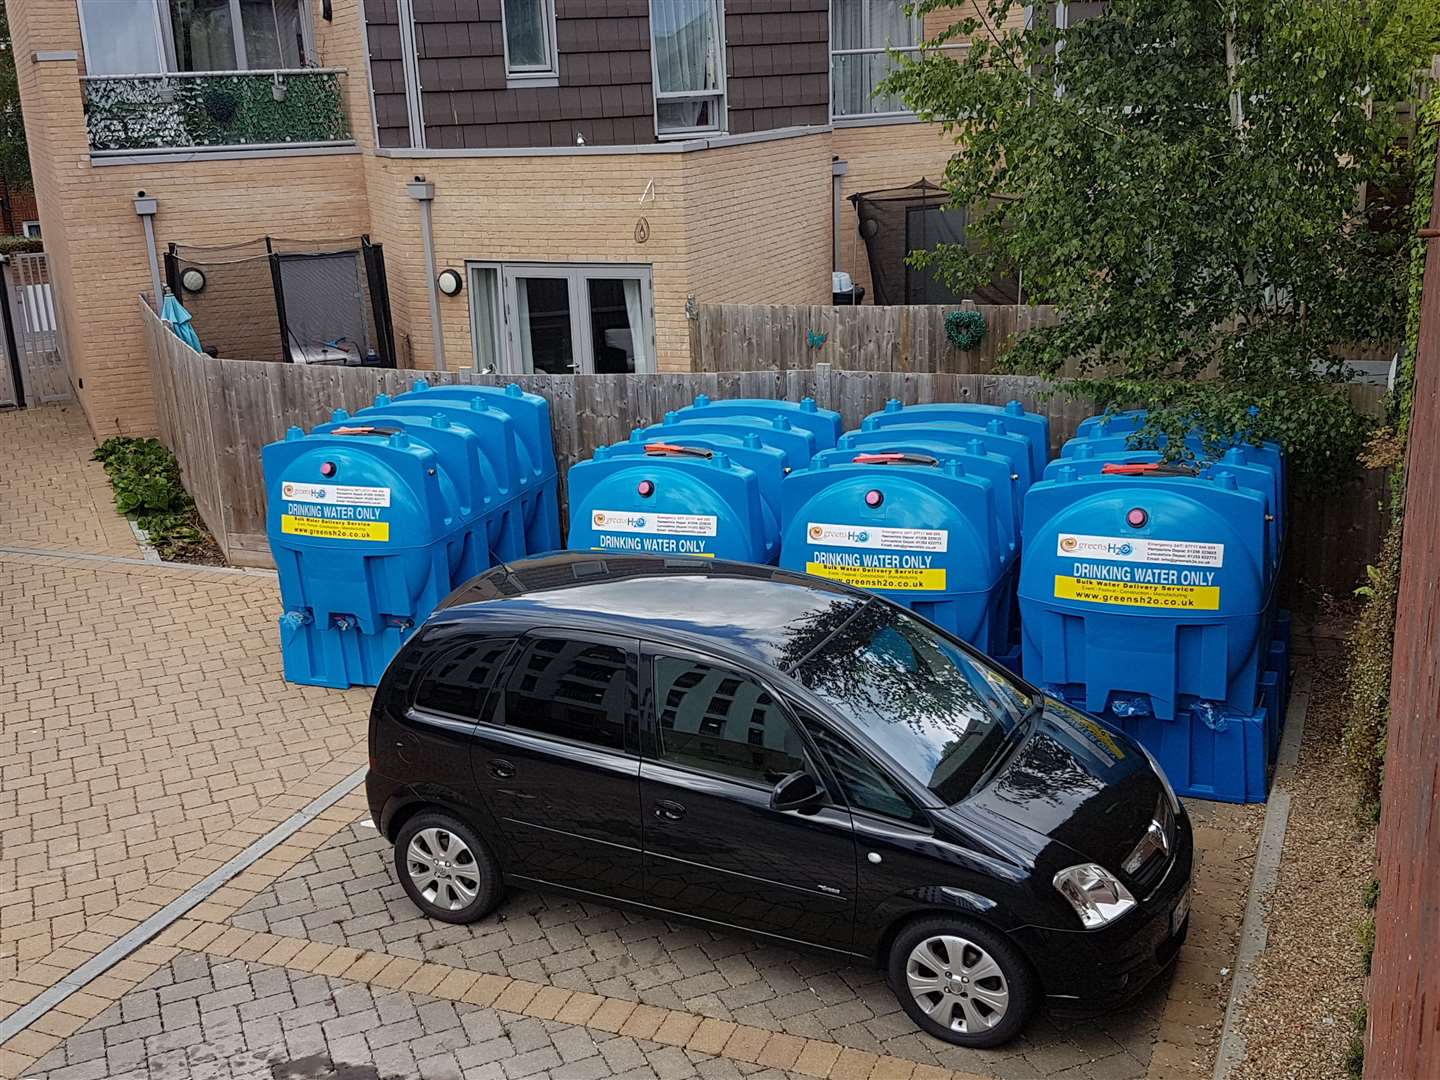 Large water tanks were installed in the Bakers House car park as a temporary measure